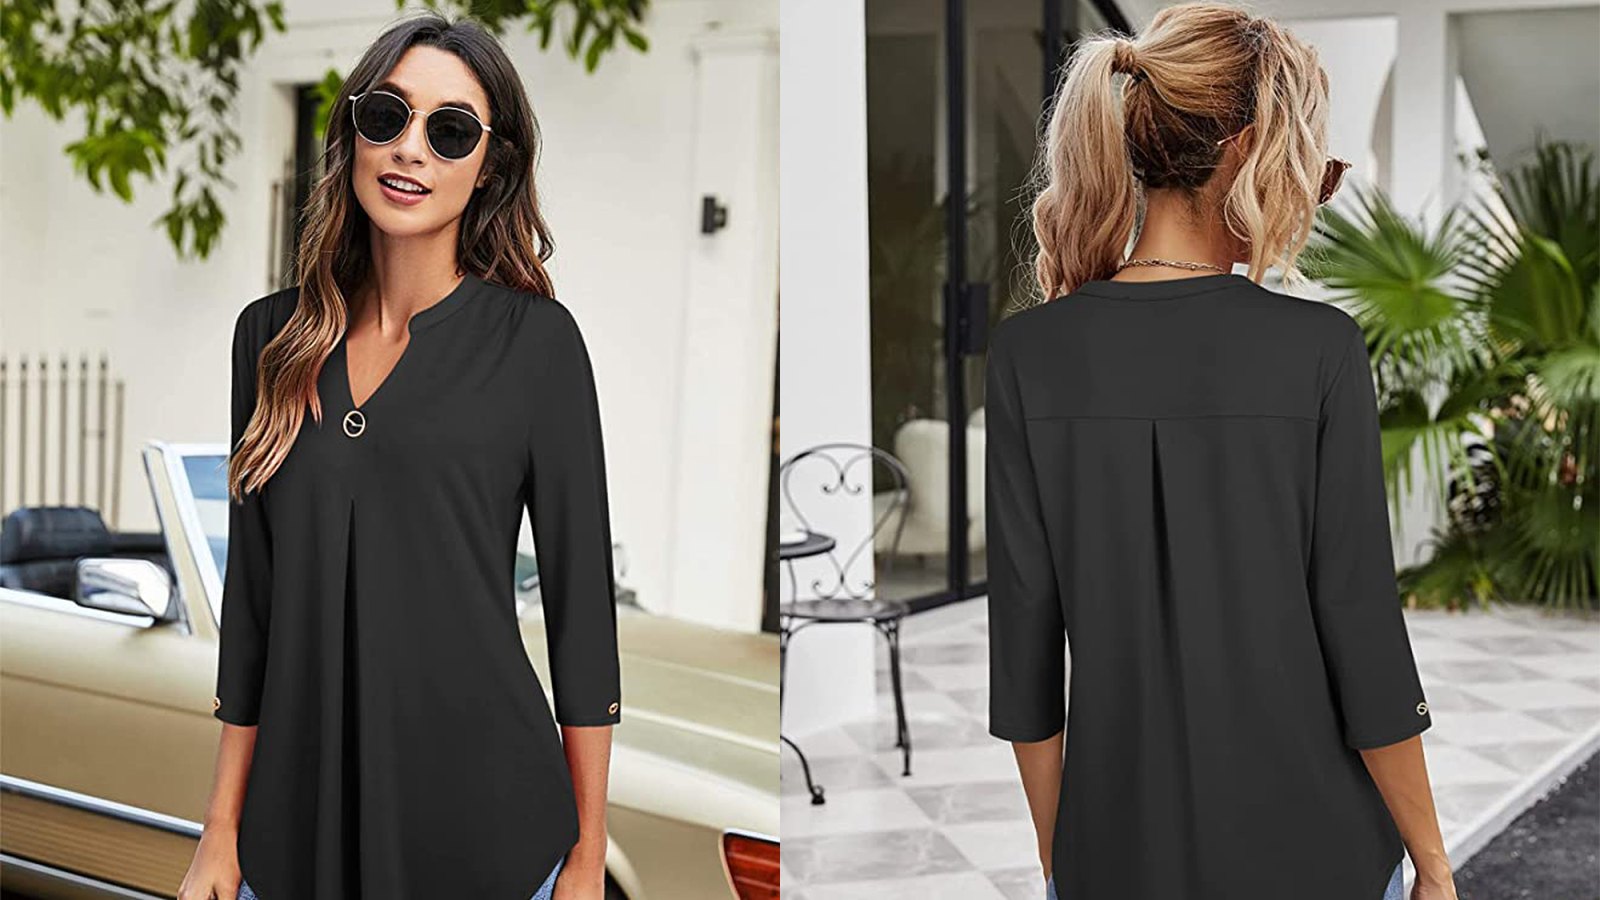 Valolia Top Has Flattering Front Pleating That’s a Hit With Shoppers ...